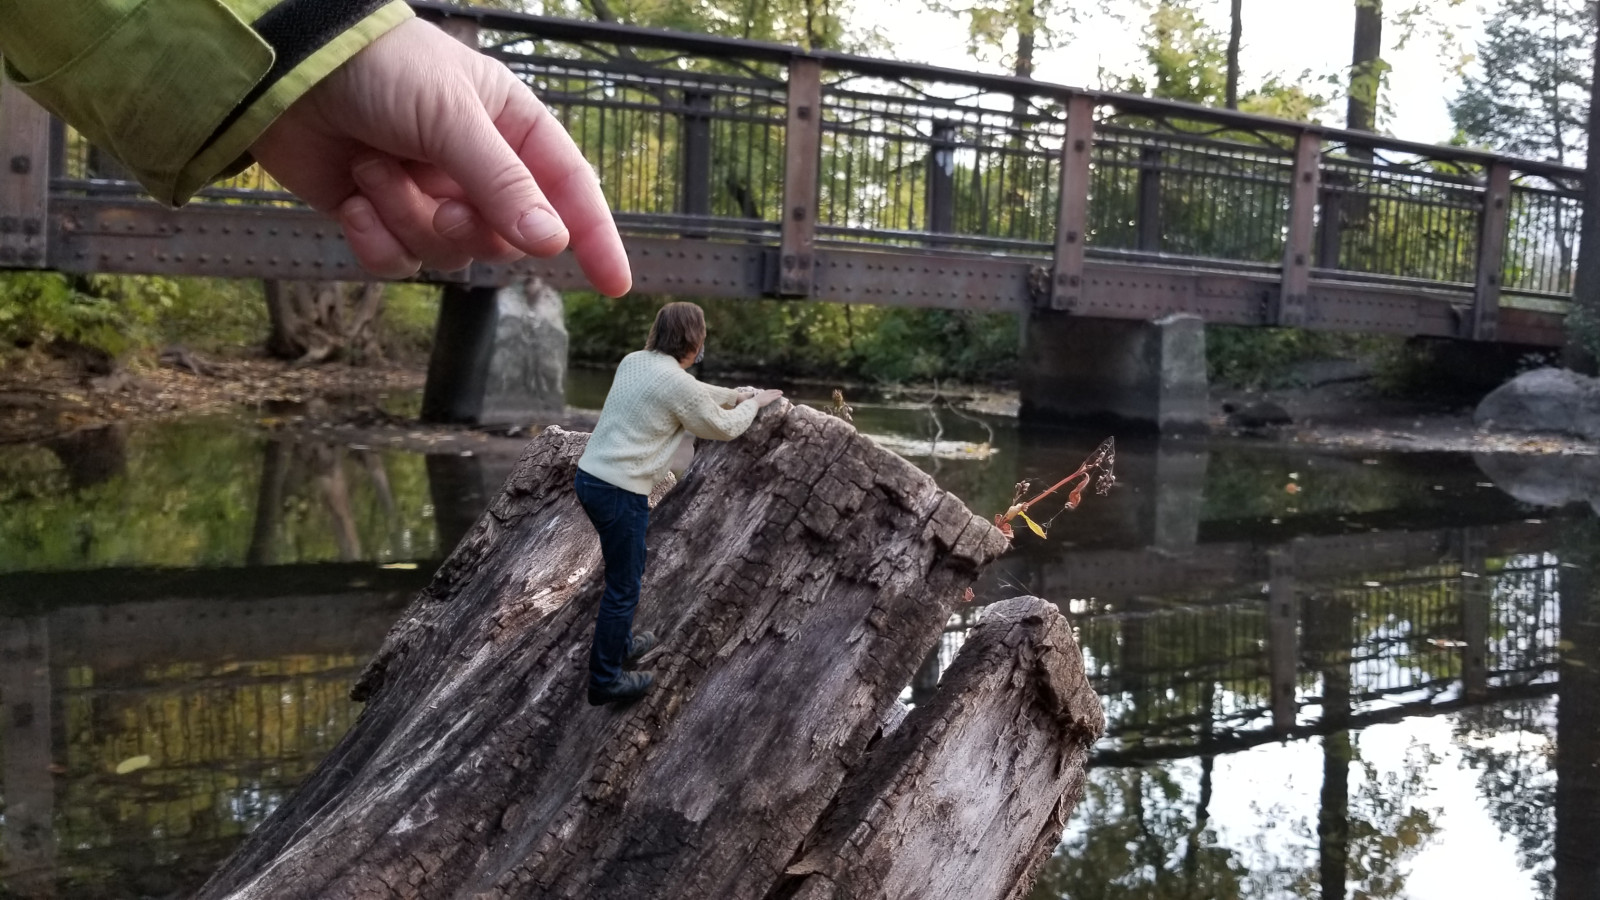 A tiny man in a sweater climbs a stump by a creek. A gigantic woman's hand reaches down to pick him up.